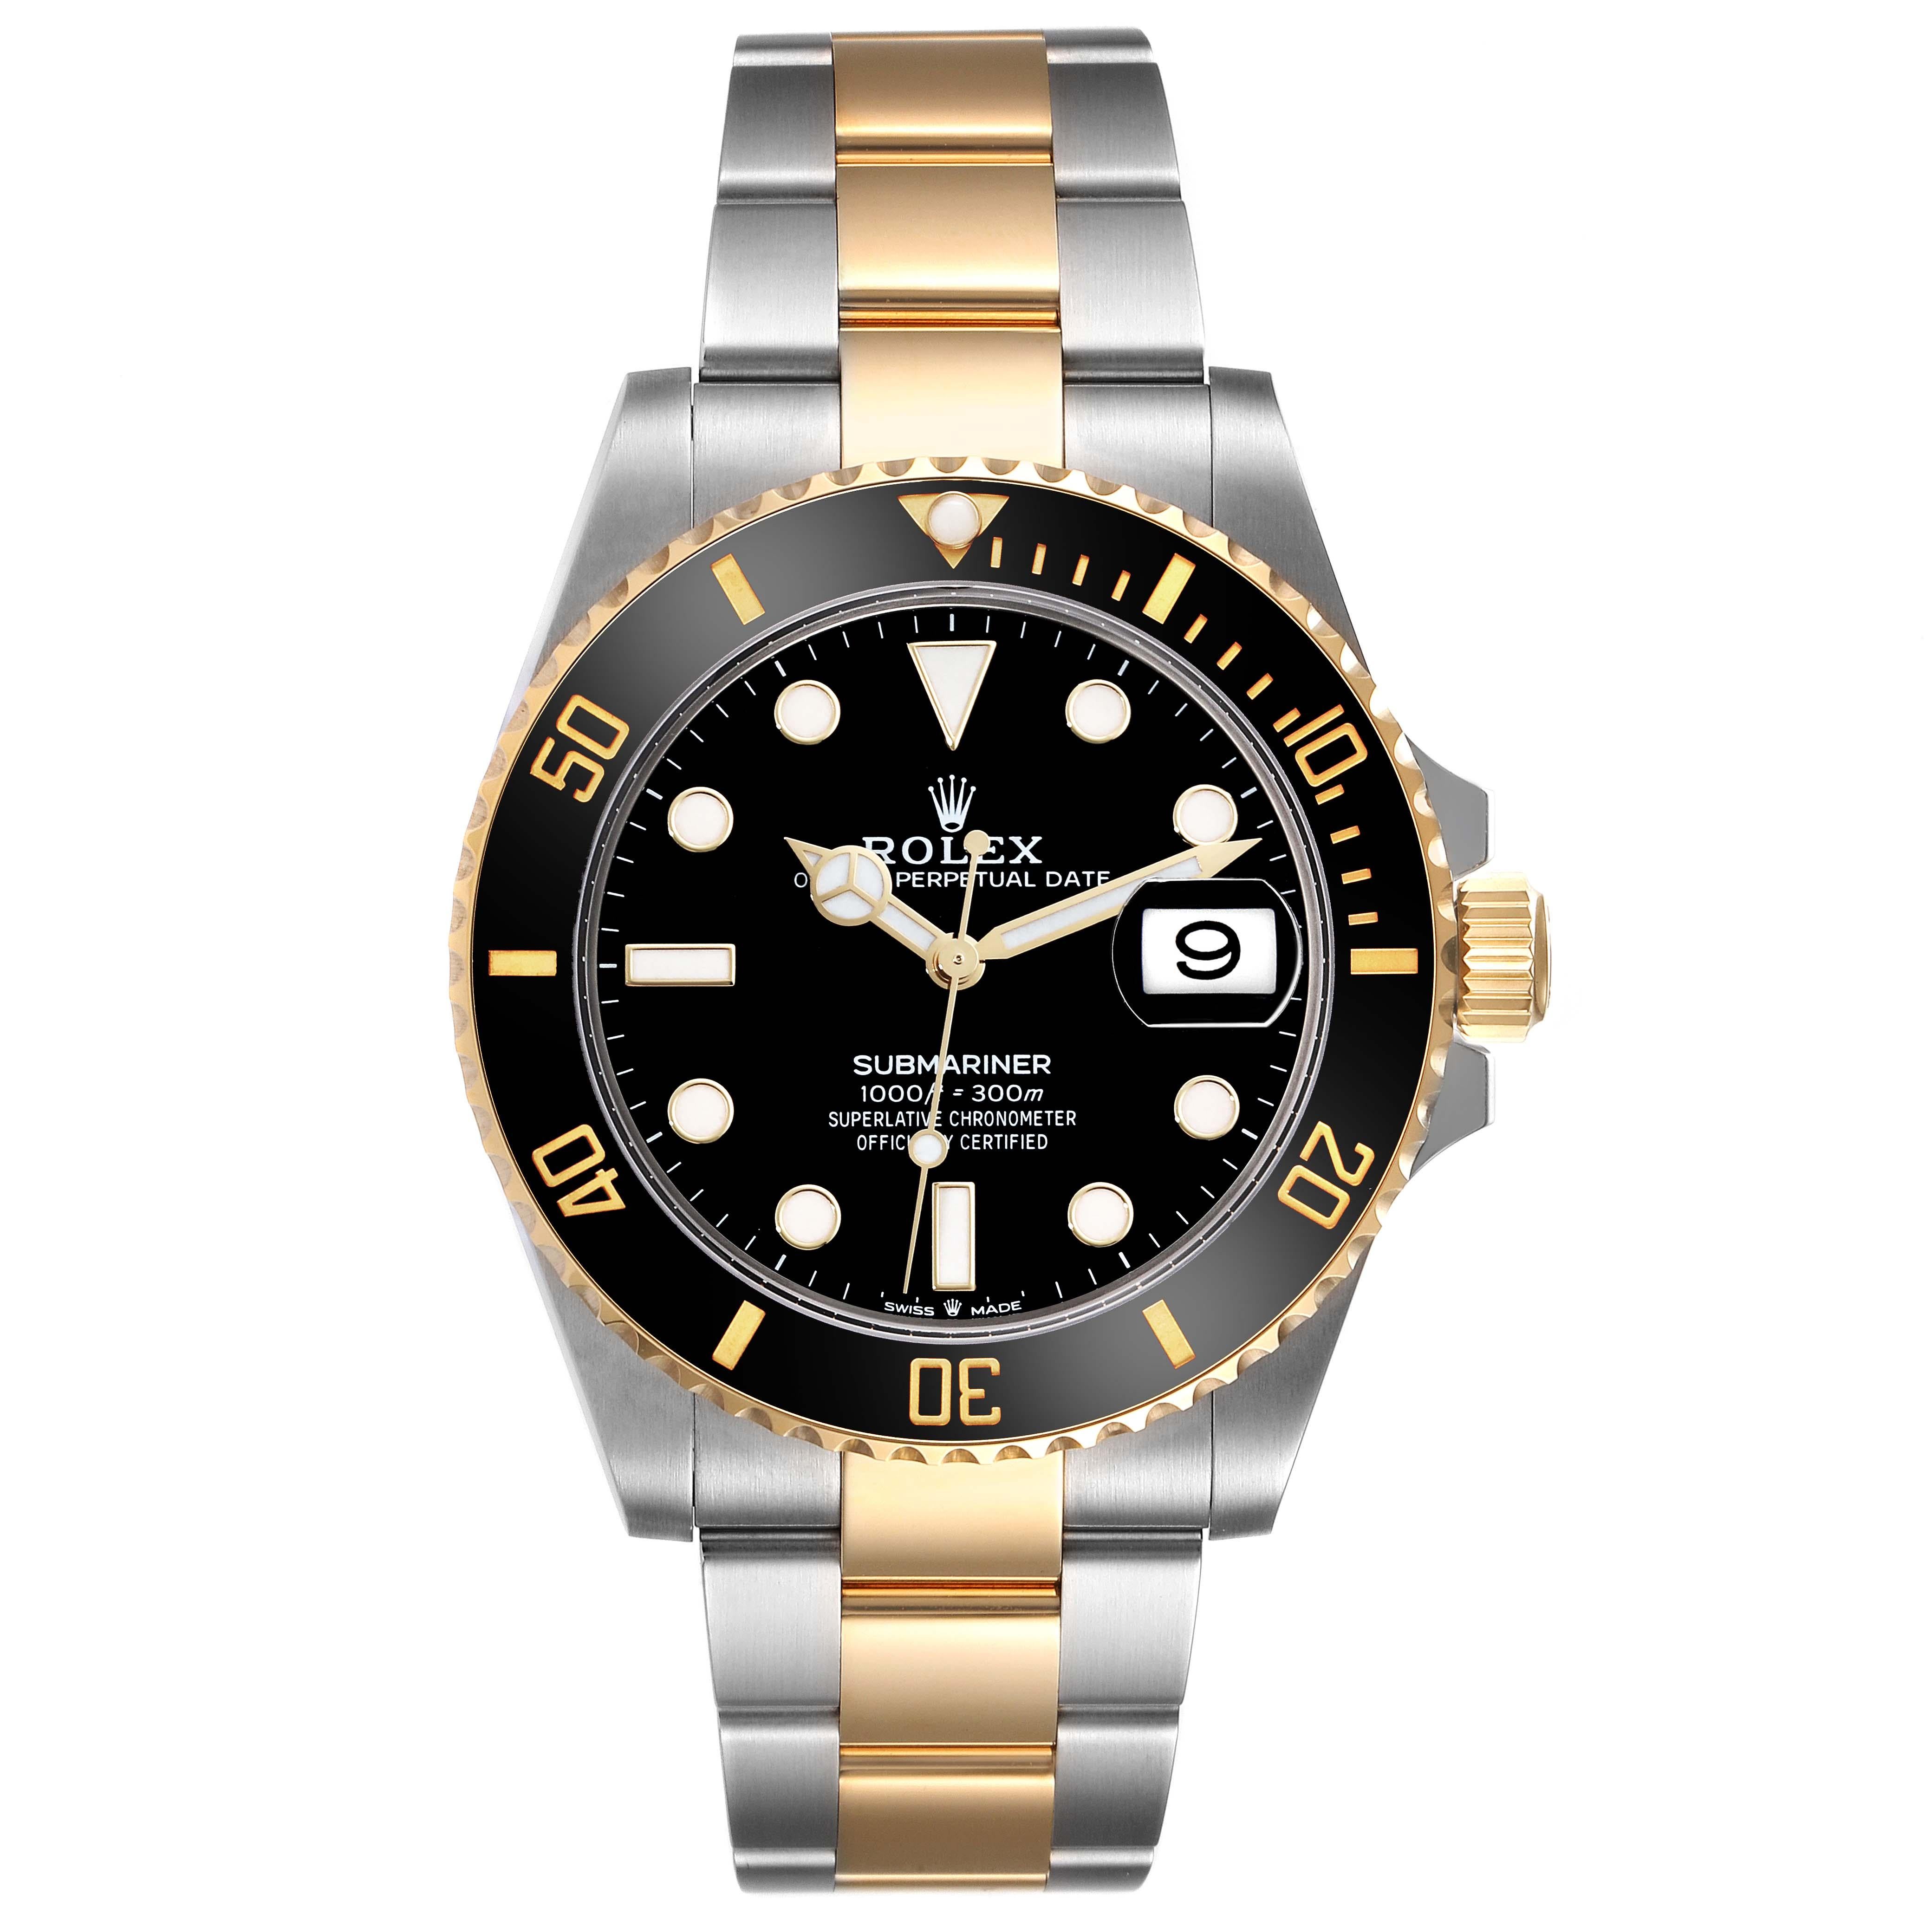 Rolex Submariner 41 Steel Yellow Gold Black Dial Mens Watch 126613 Box Card. Officially certified chronometer automatic self-winding movement. Stainless steel and 18k yellow gold case 41 mm in diameter. Rolex logo on the crown. Ceramic black